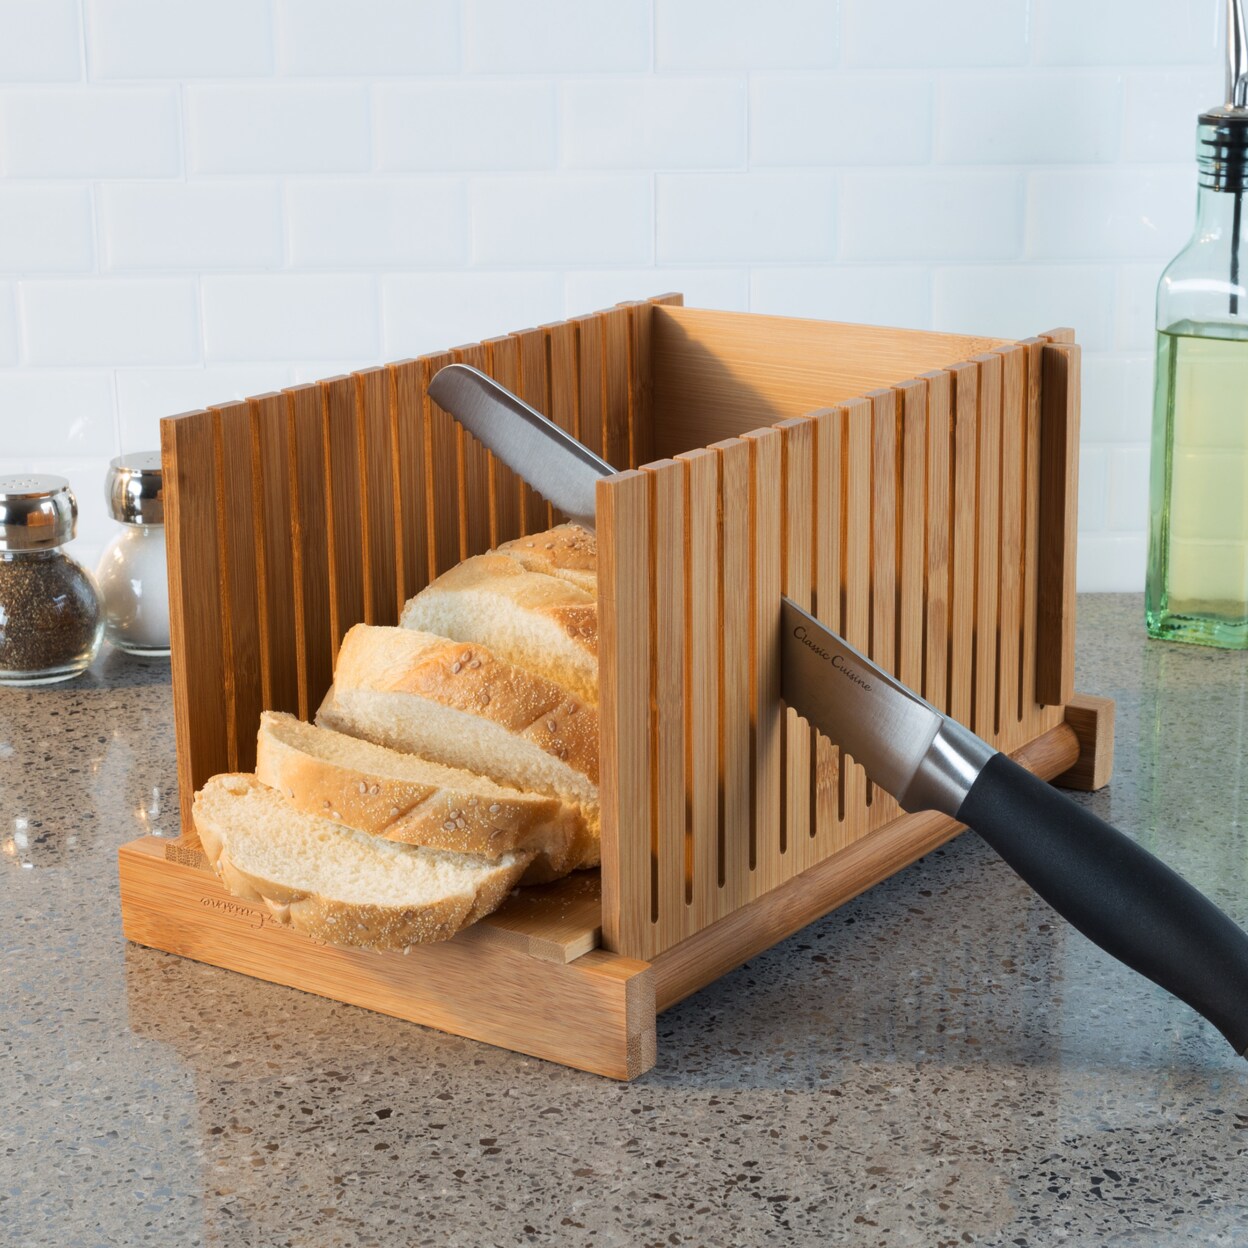 Classic Cuisine Bamboo Bread Slicer- Foldable Adjustable Knife Guide and Board for Cutting Loaves Evenly